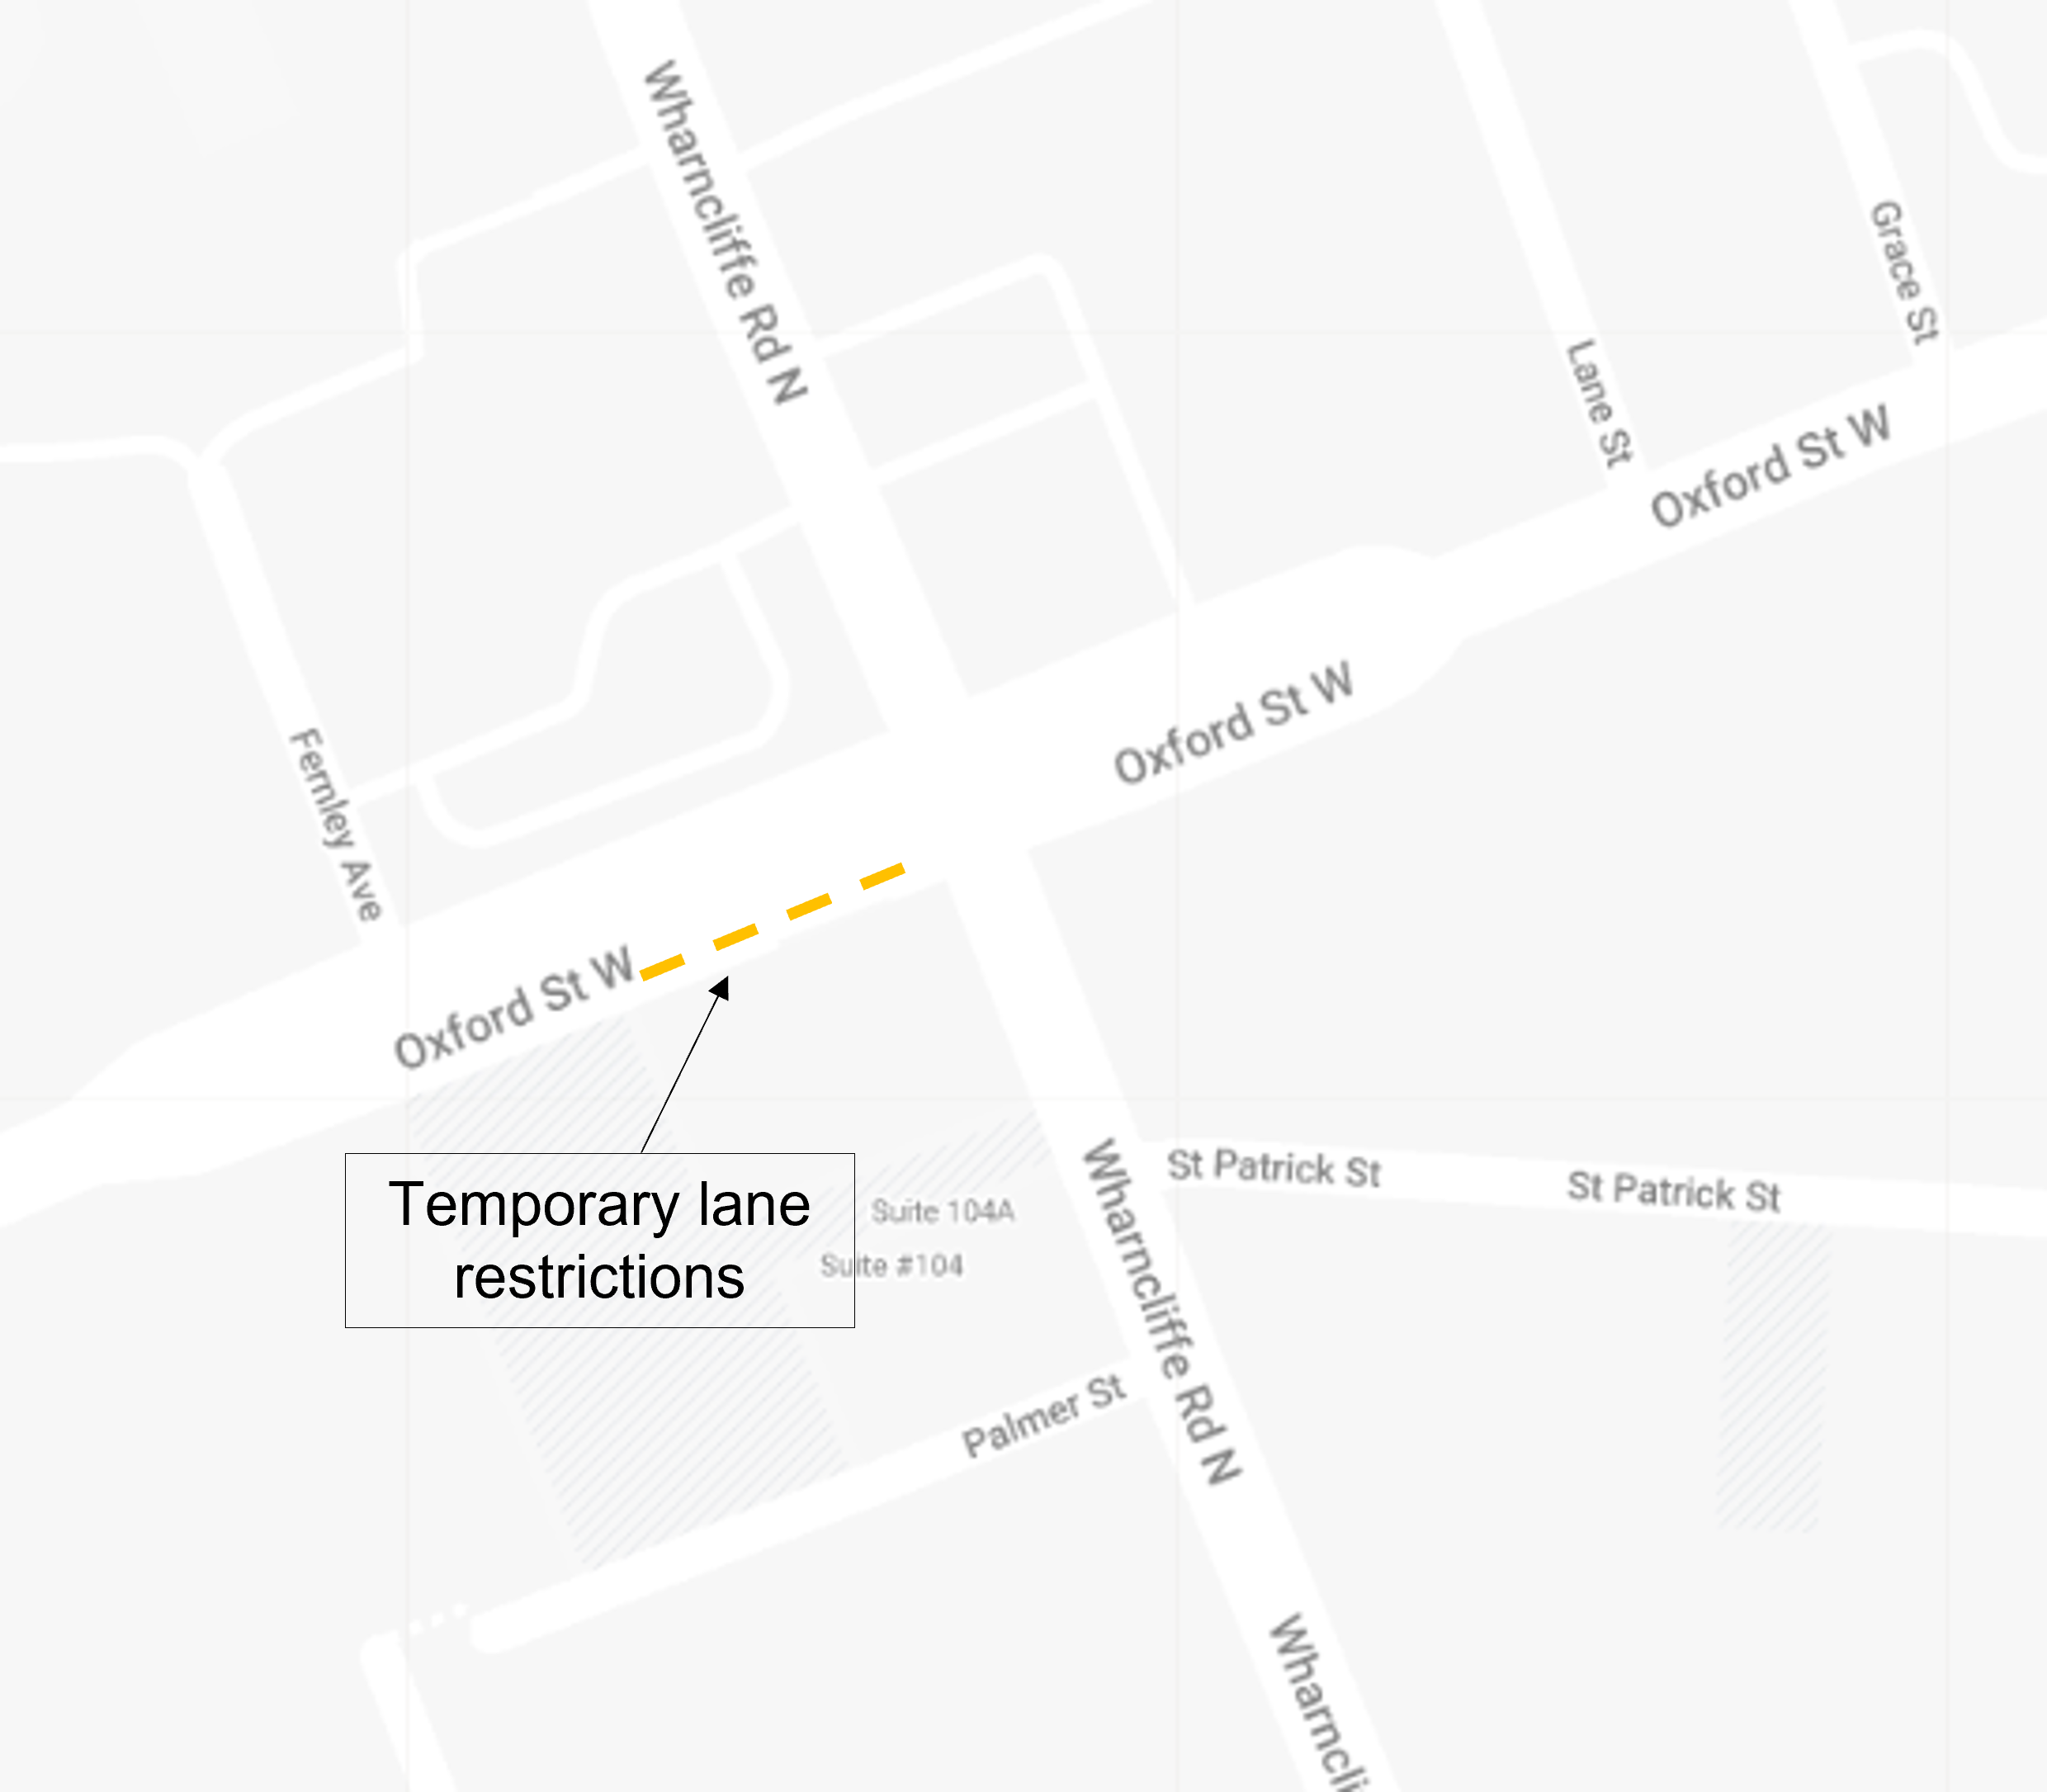 A map of the temporary lane restrictions on Oxford Street West, west of Wharncliffe